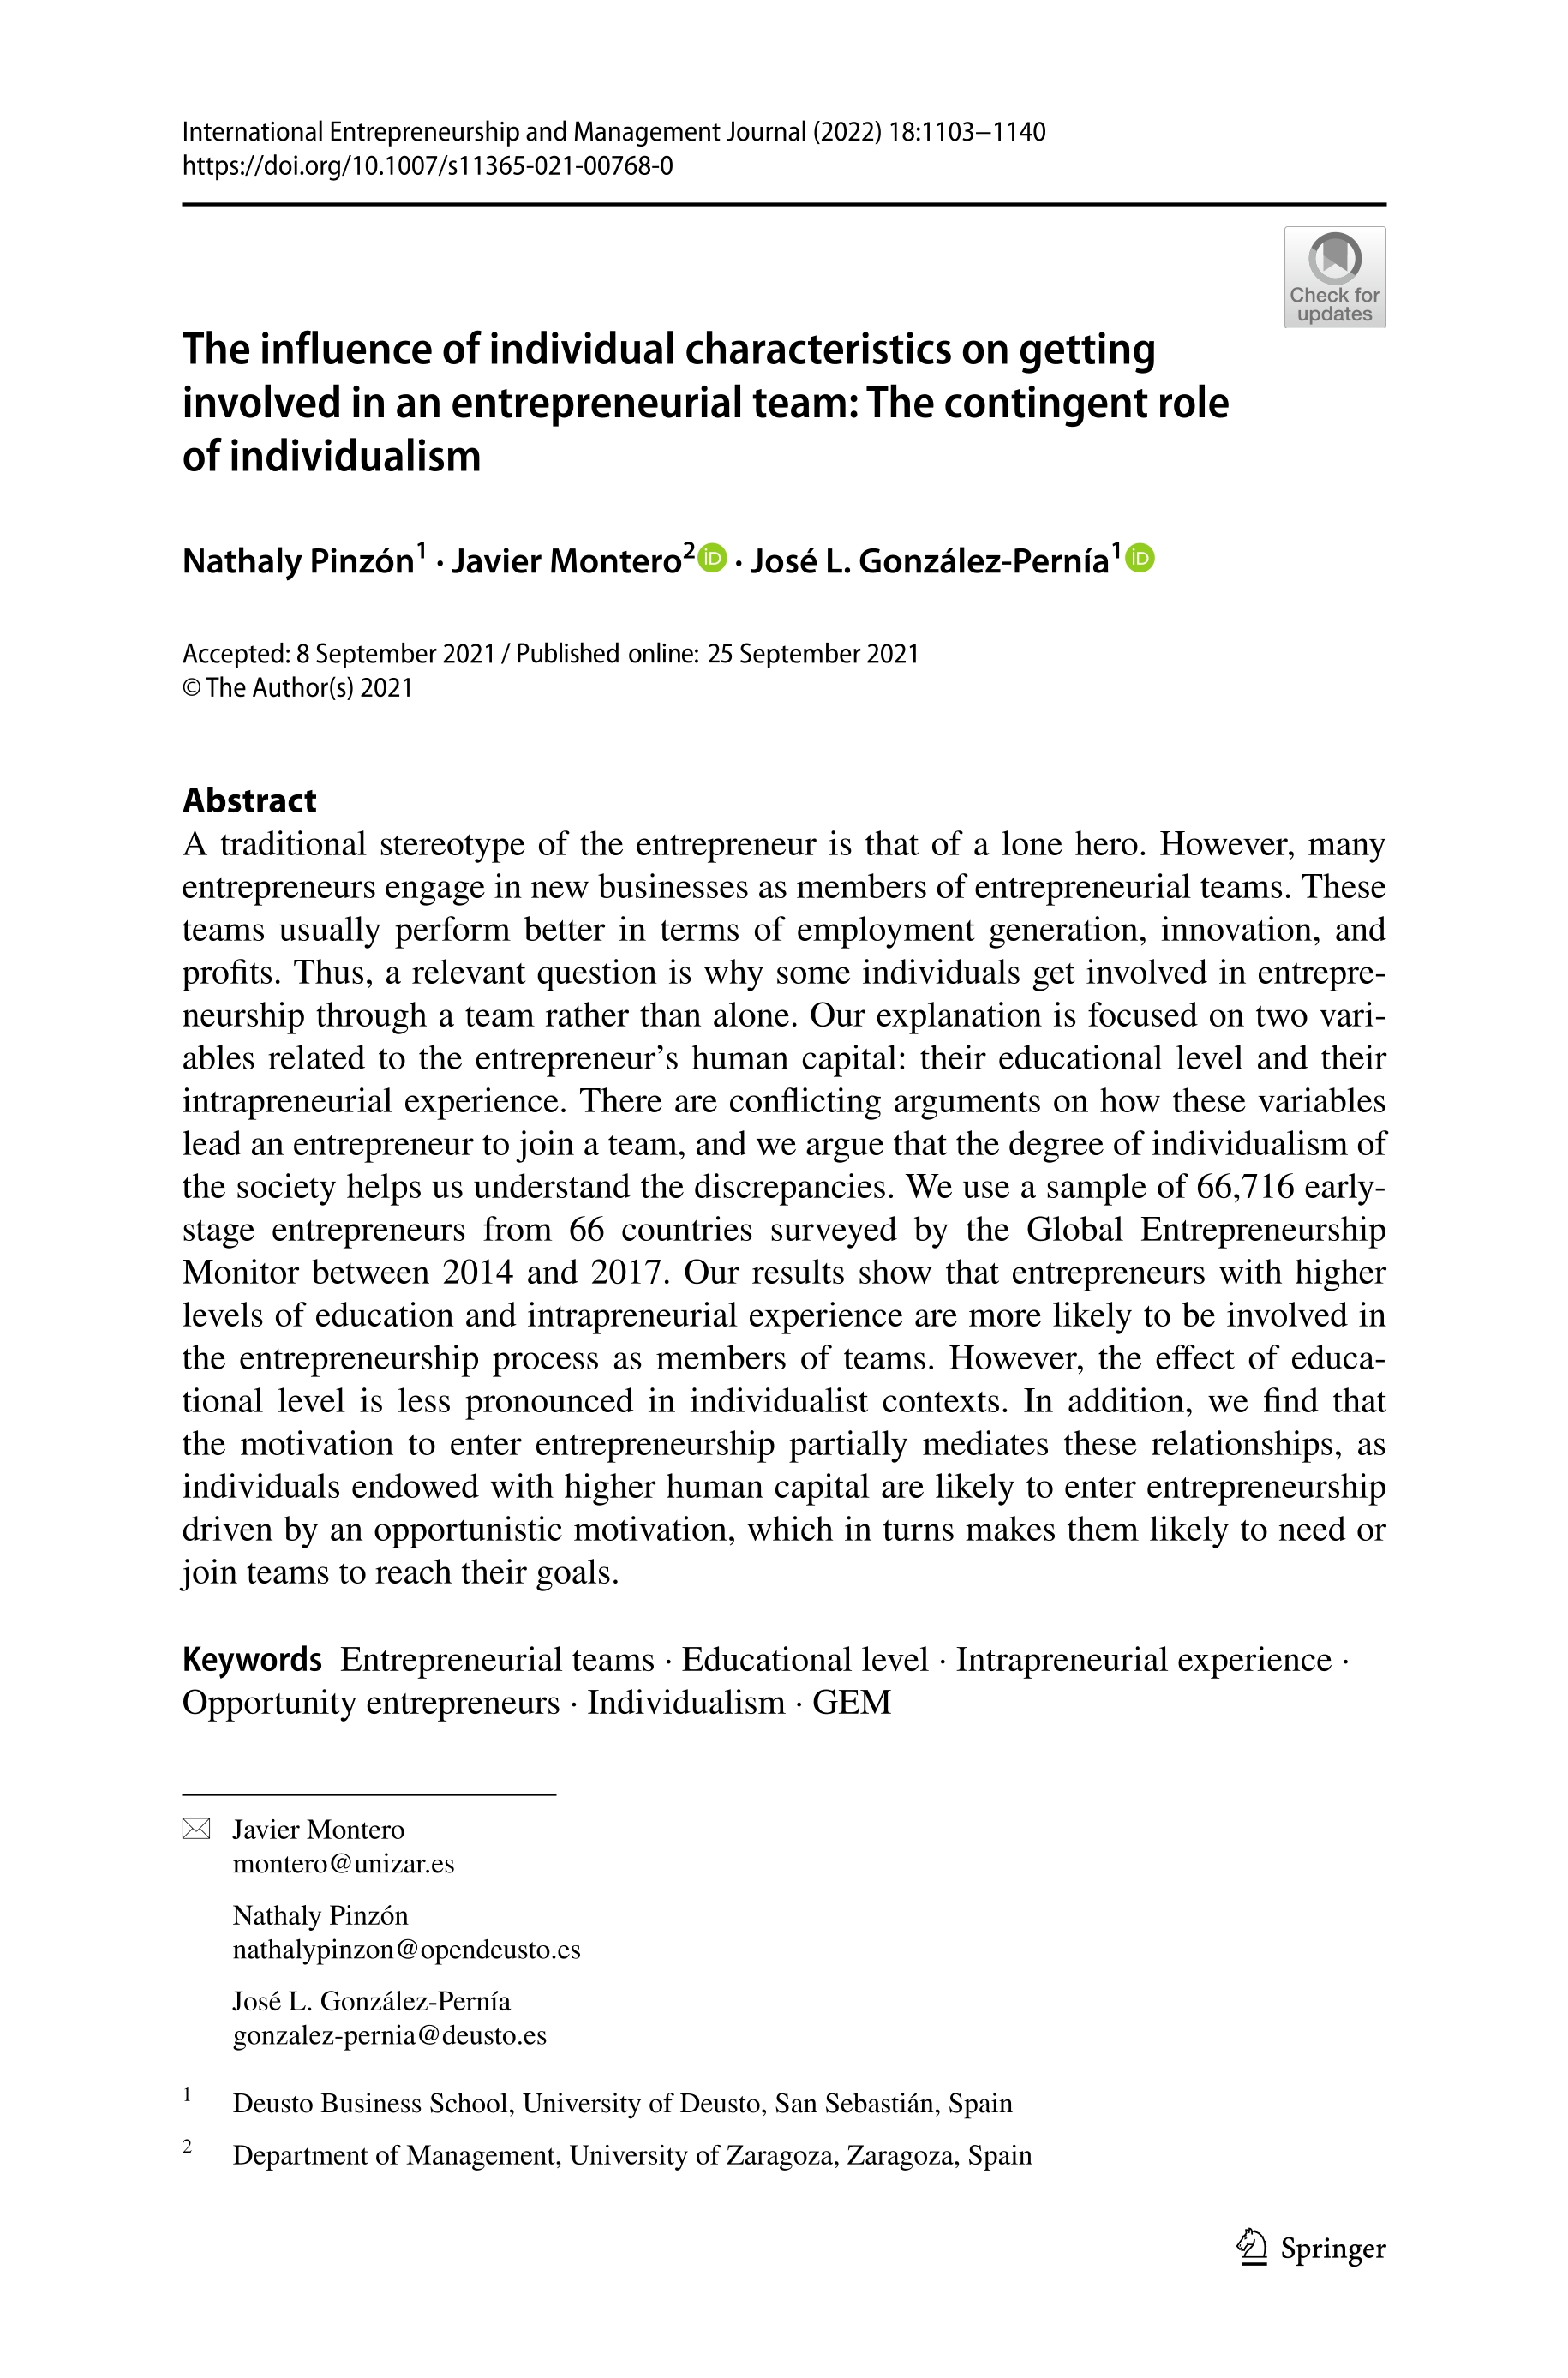 The influence of individual characteristics on getting involved in an entrepreneurial team: The contingent role of individualism